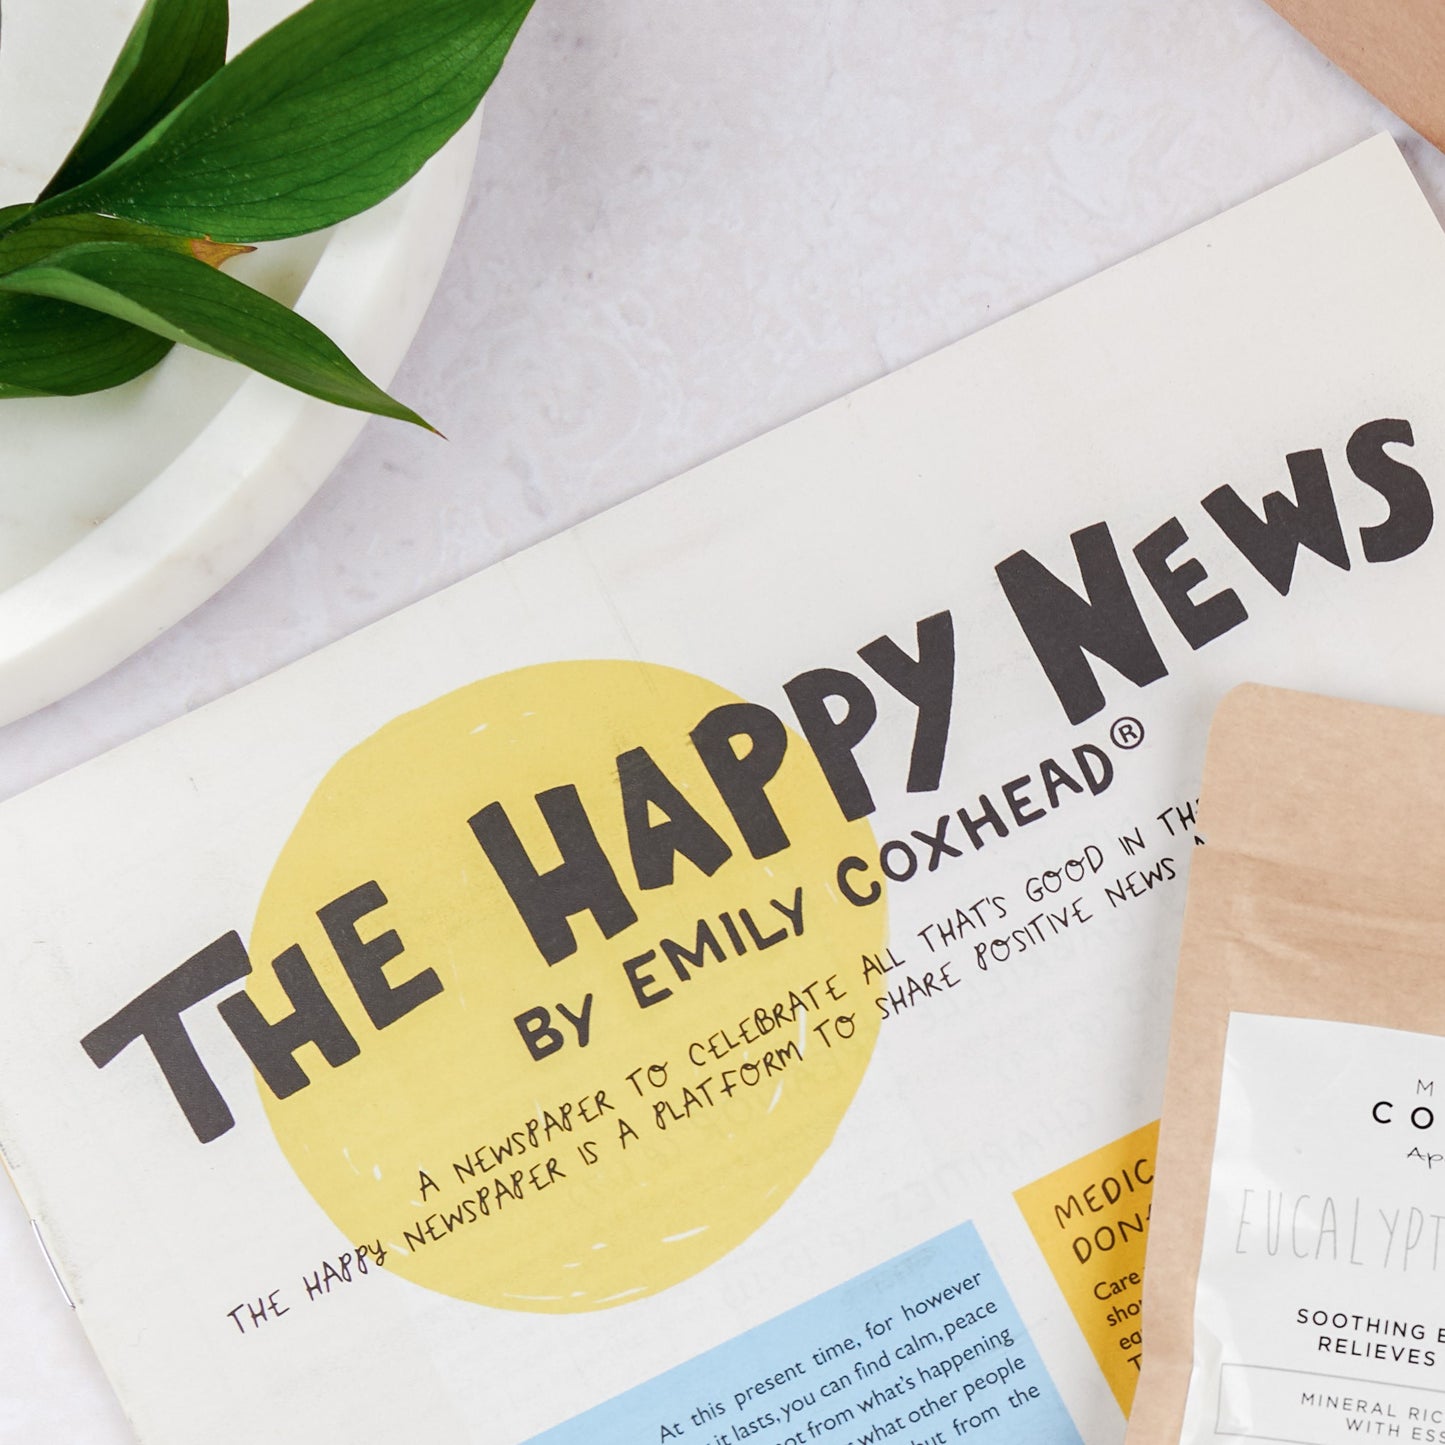 The Happy News at Out of the Box Gifts